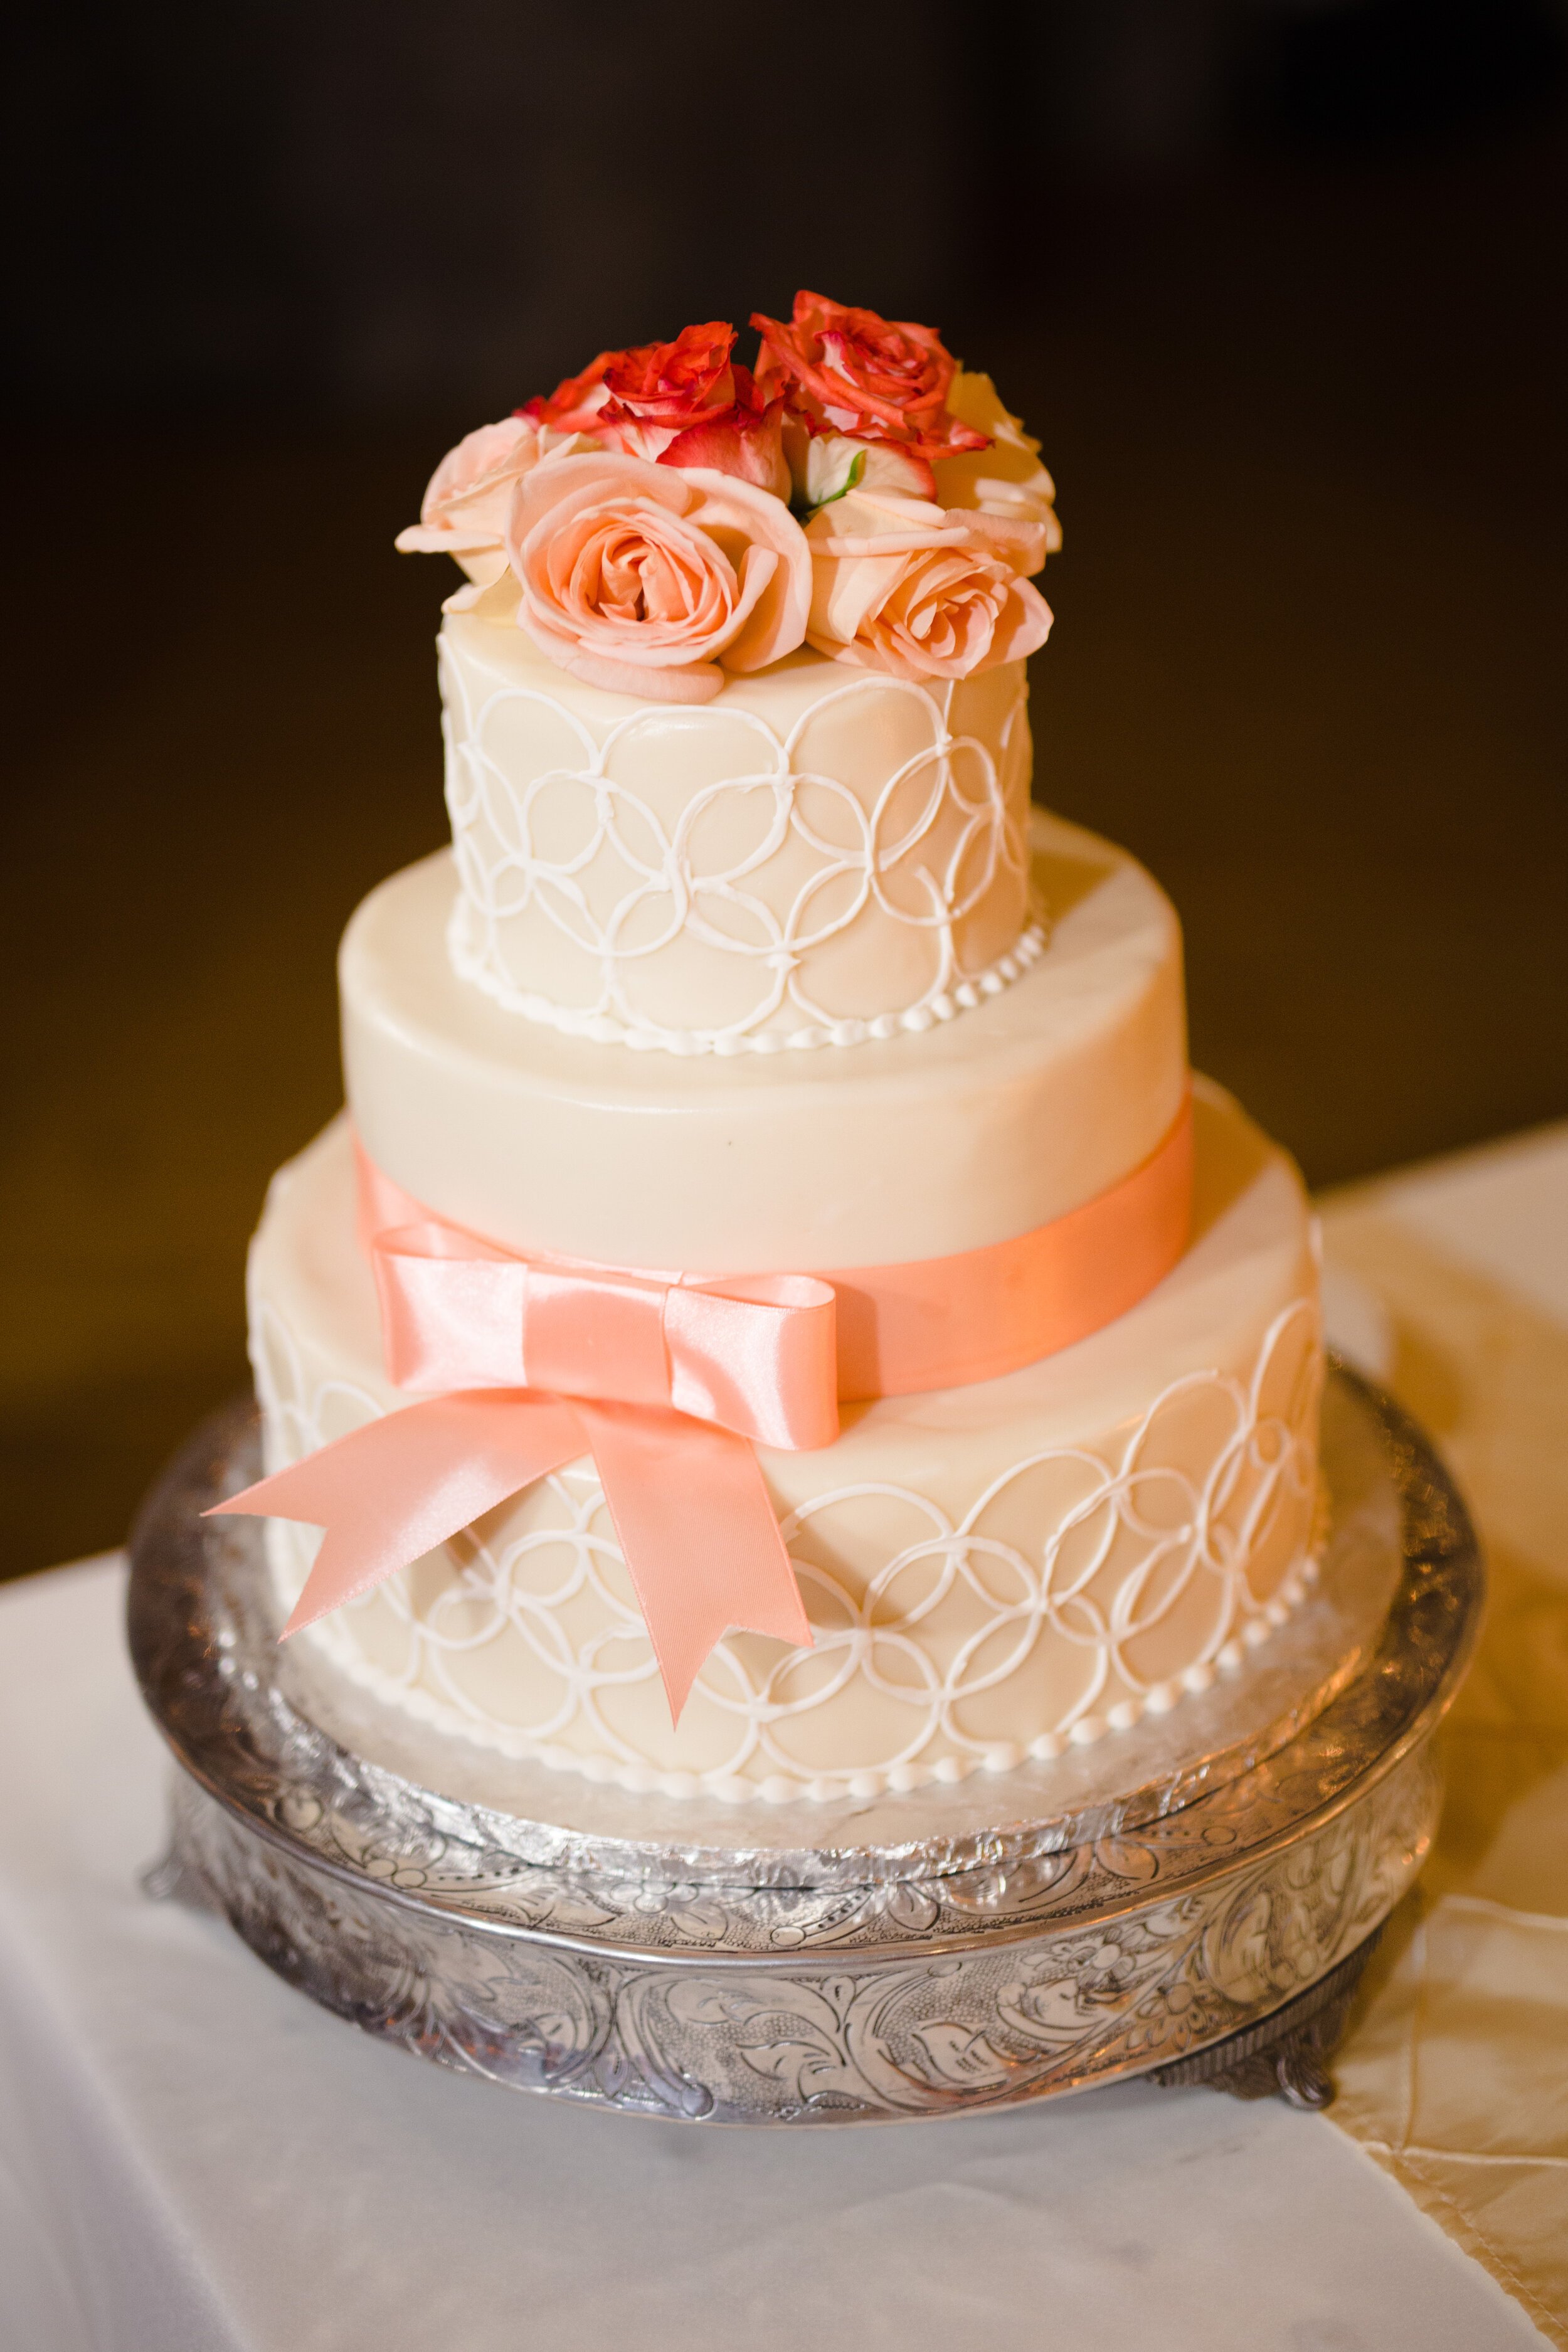 wedding-cake-with-roses-pink-and-white-wedding-cake-wedding-cake-with-pink-bow.jpg